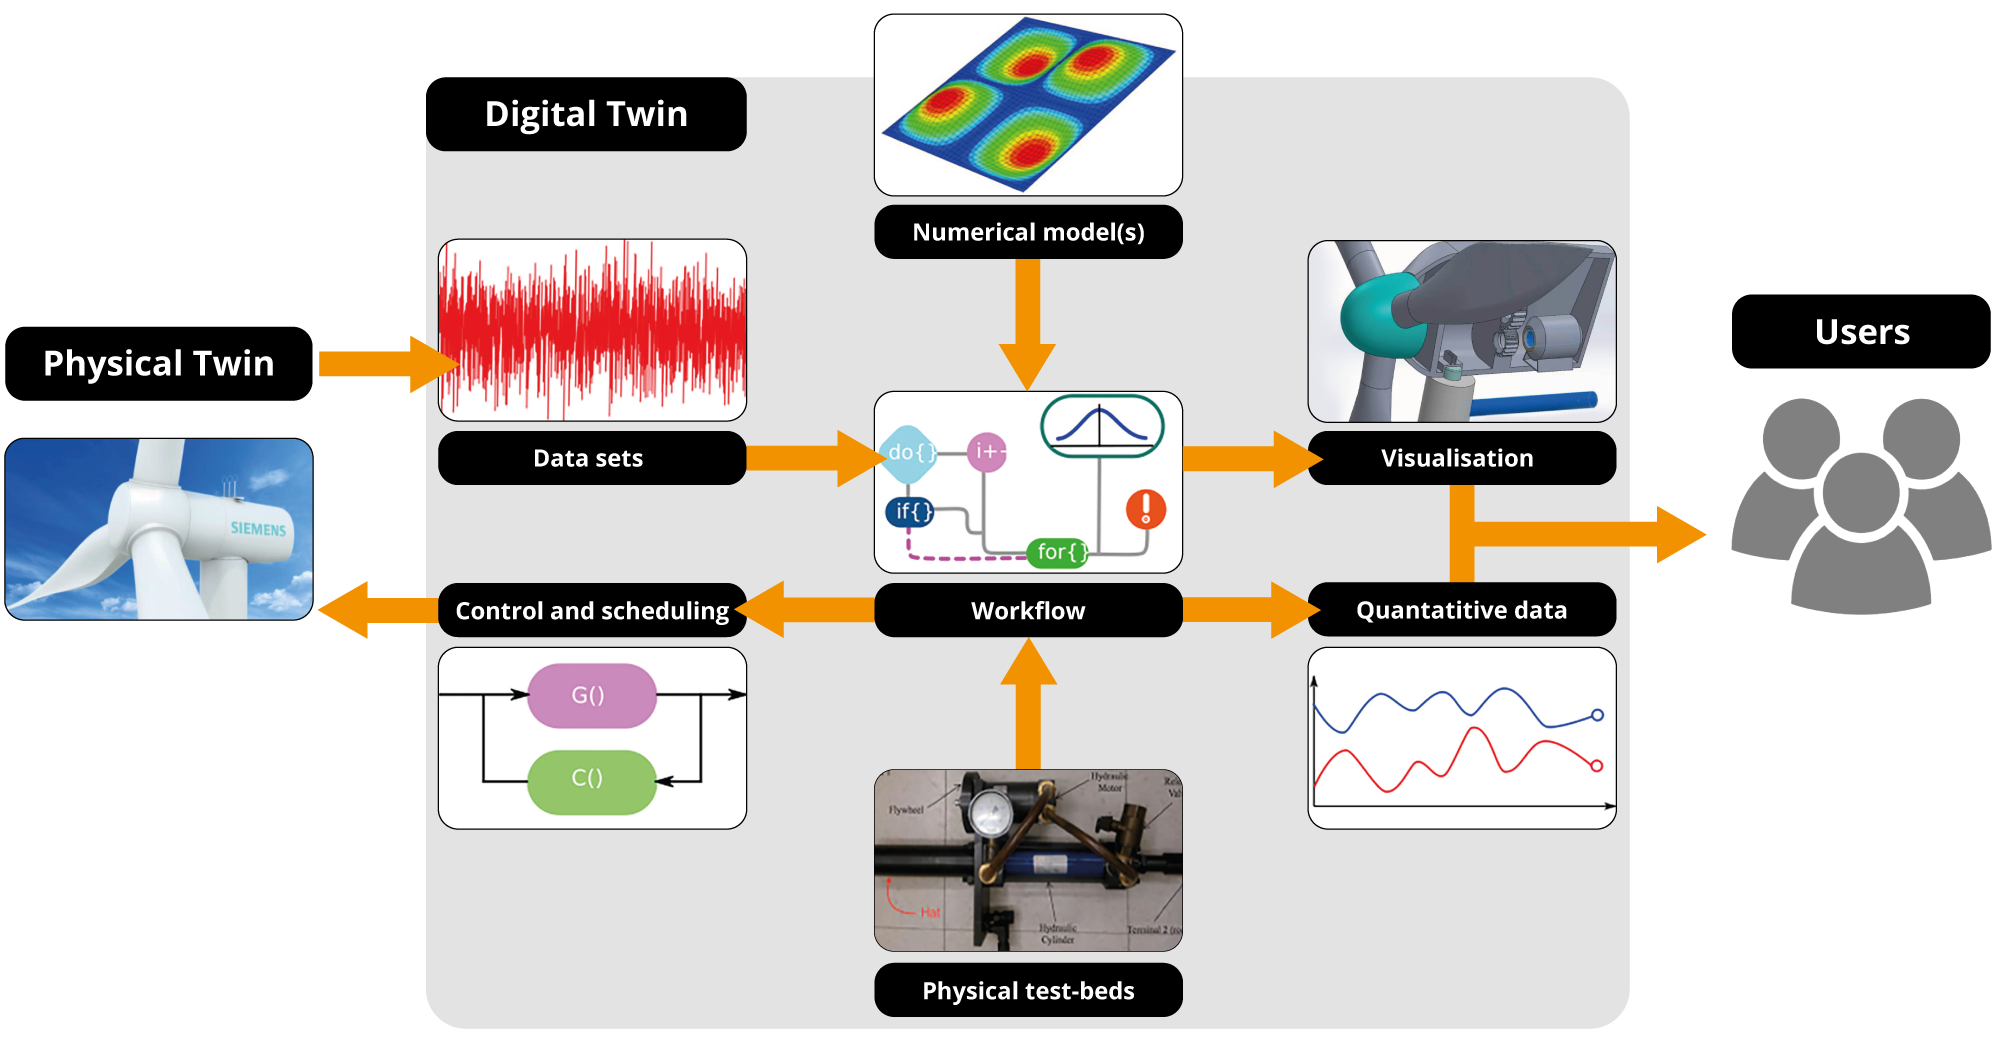 Concept of a digital twin DigiTwin